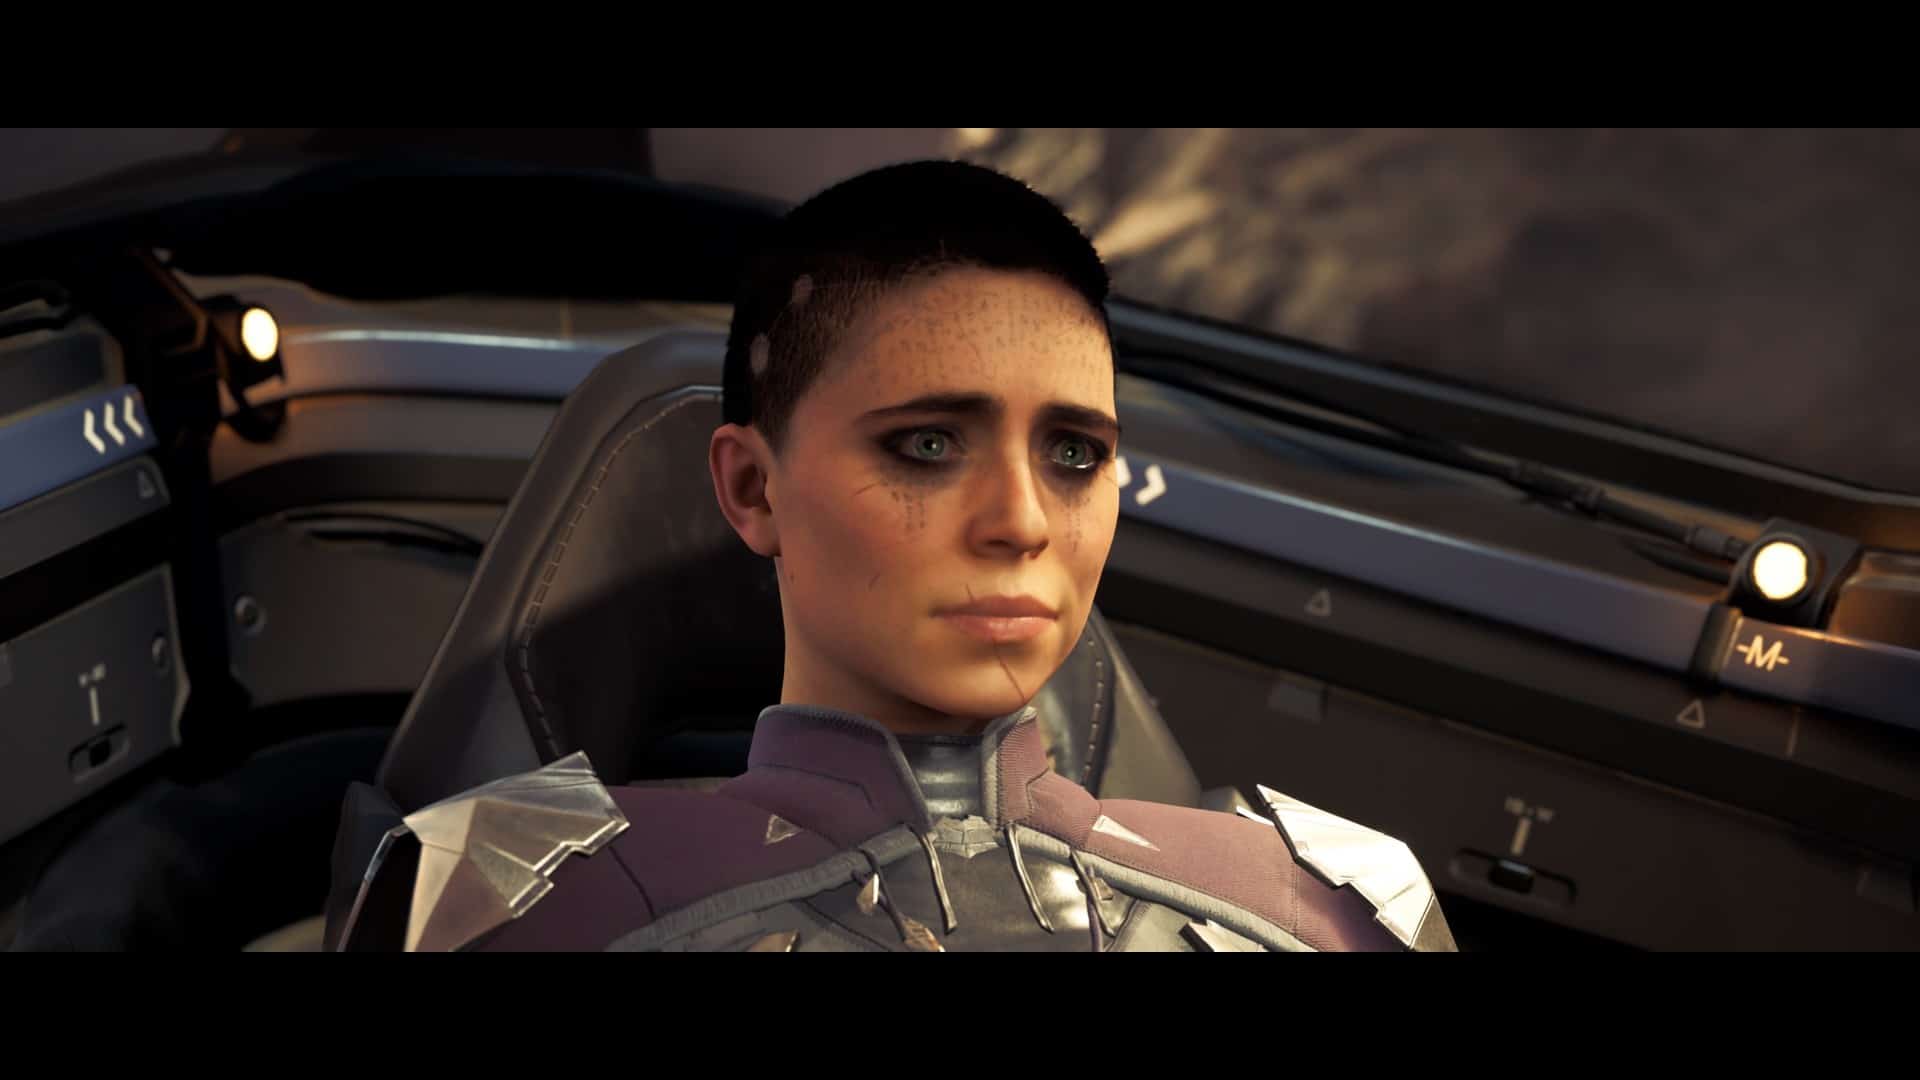 Nara is an interesting main character, but her facial animations are not quite up to scratch.